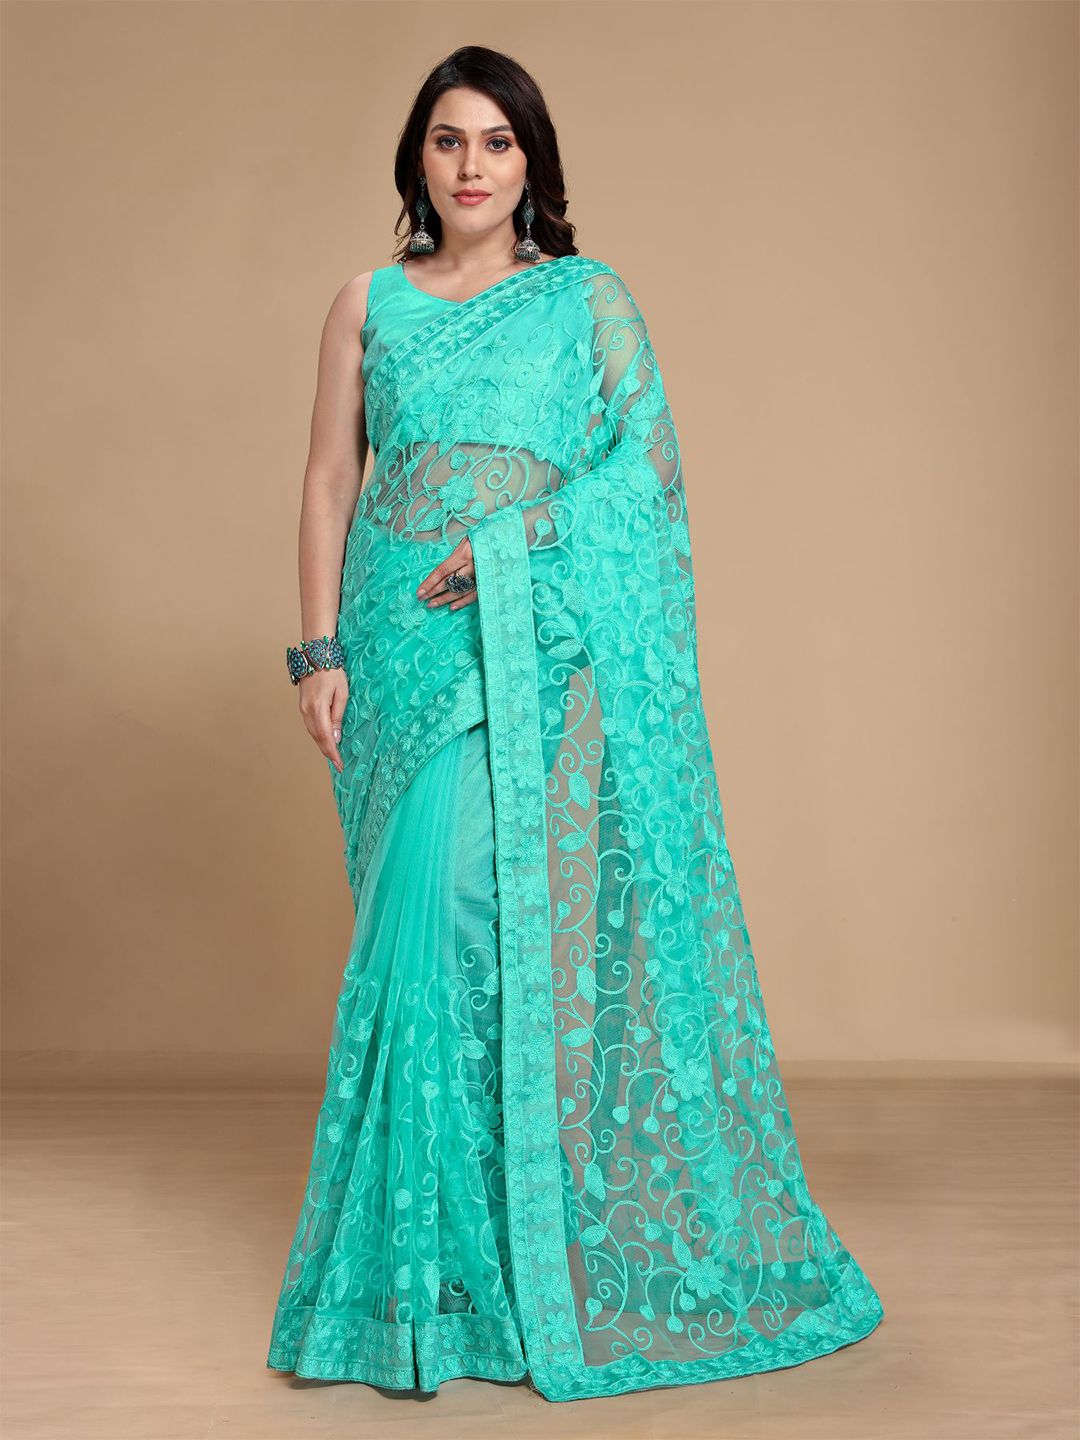 VAIRAGEE Turquoise Blue Floral Embroidered Net Saree Price in India